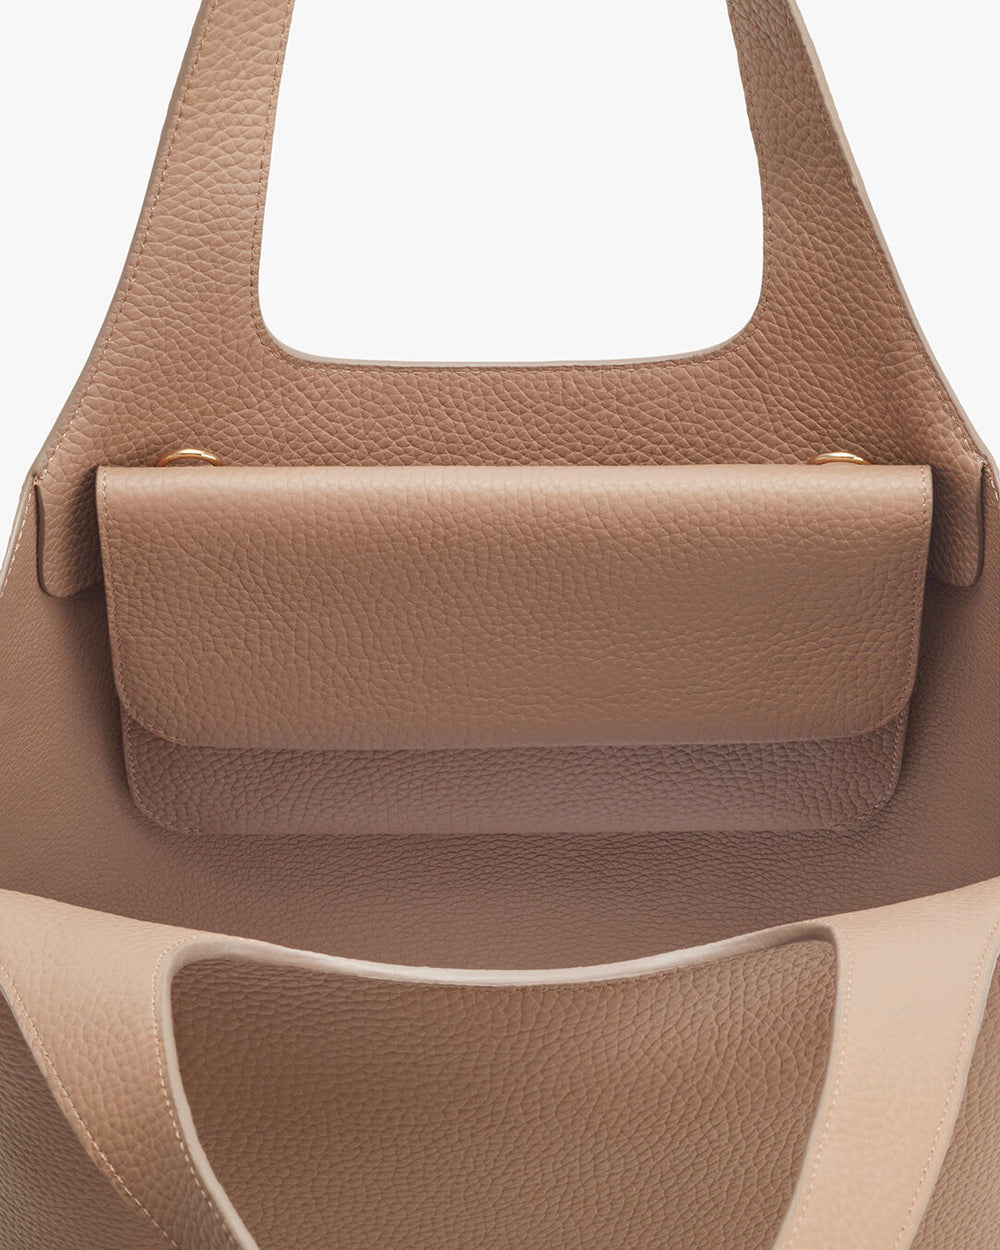 Close-up view of a handbag with a flap closure and structured handle.